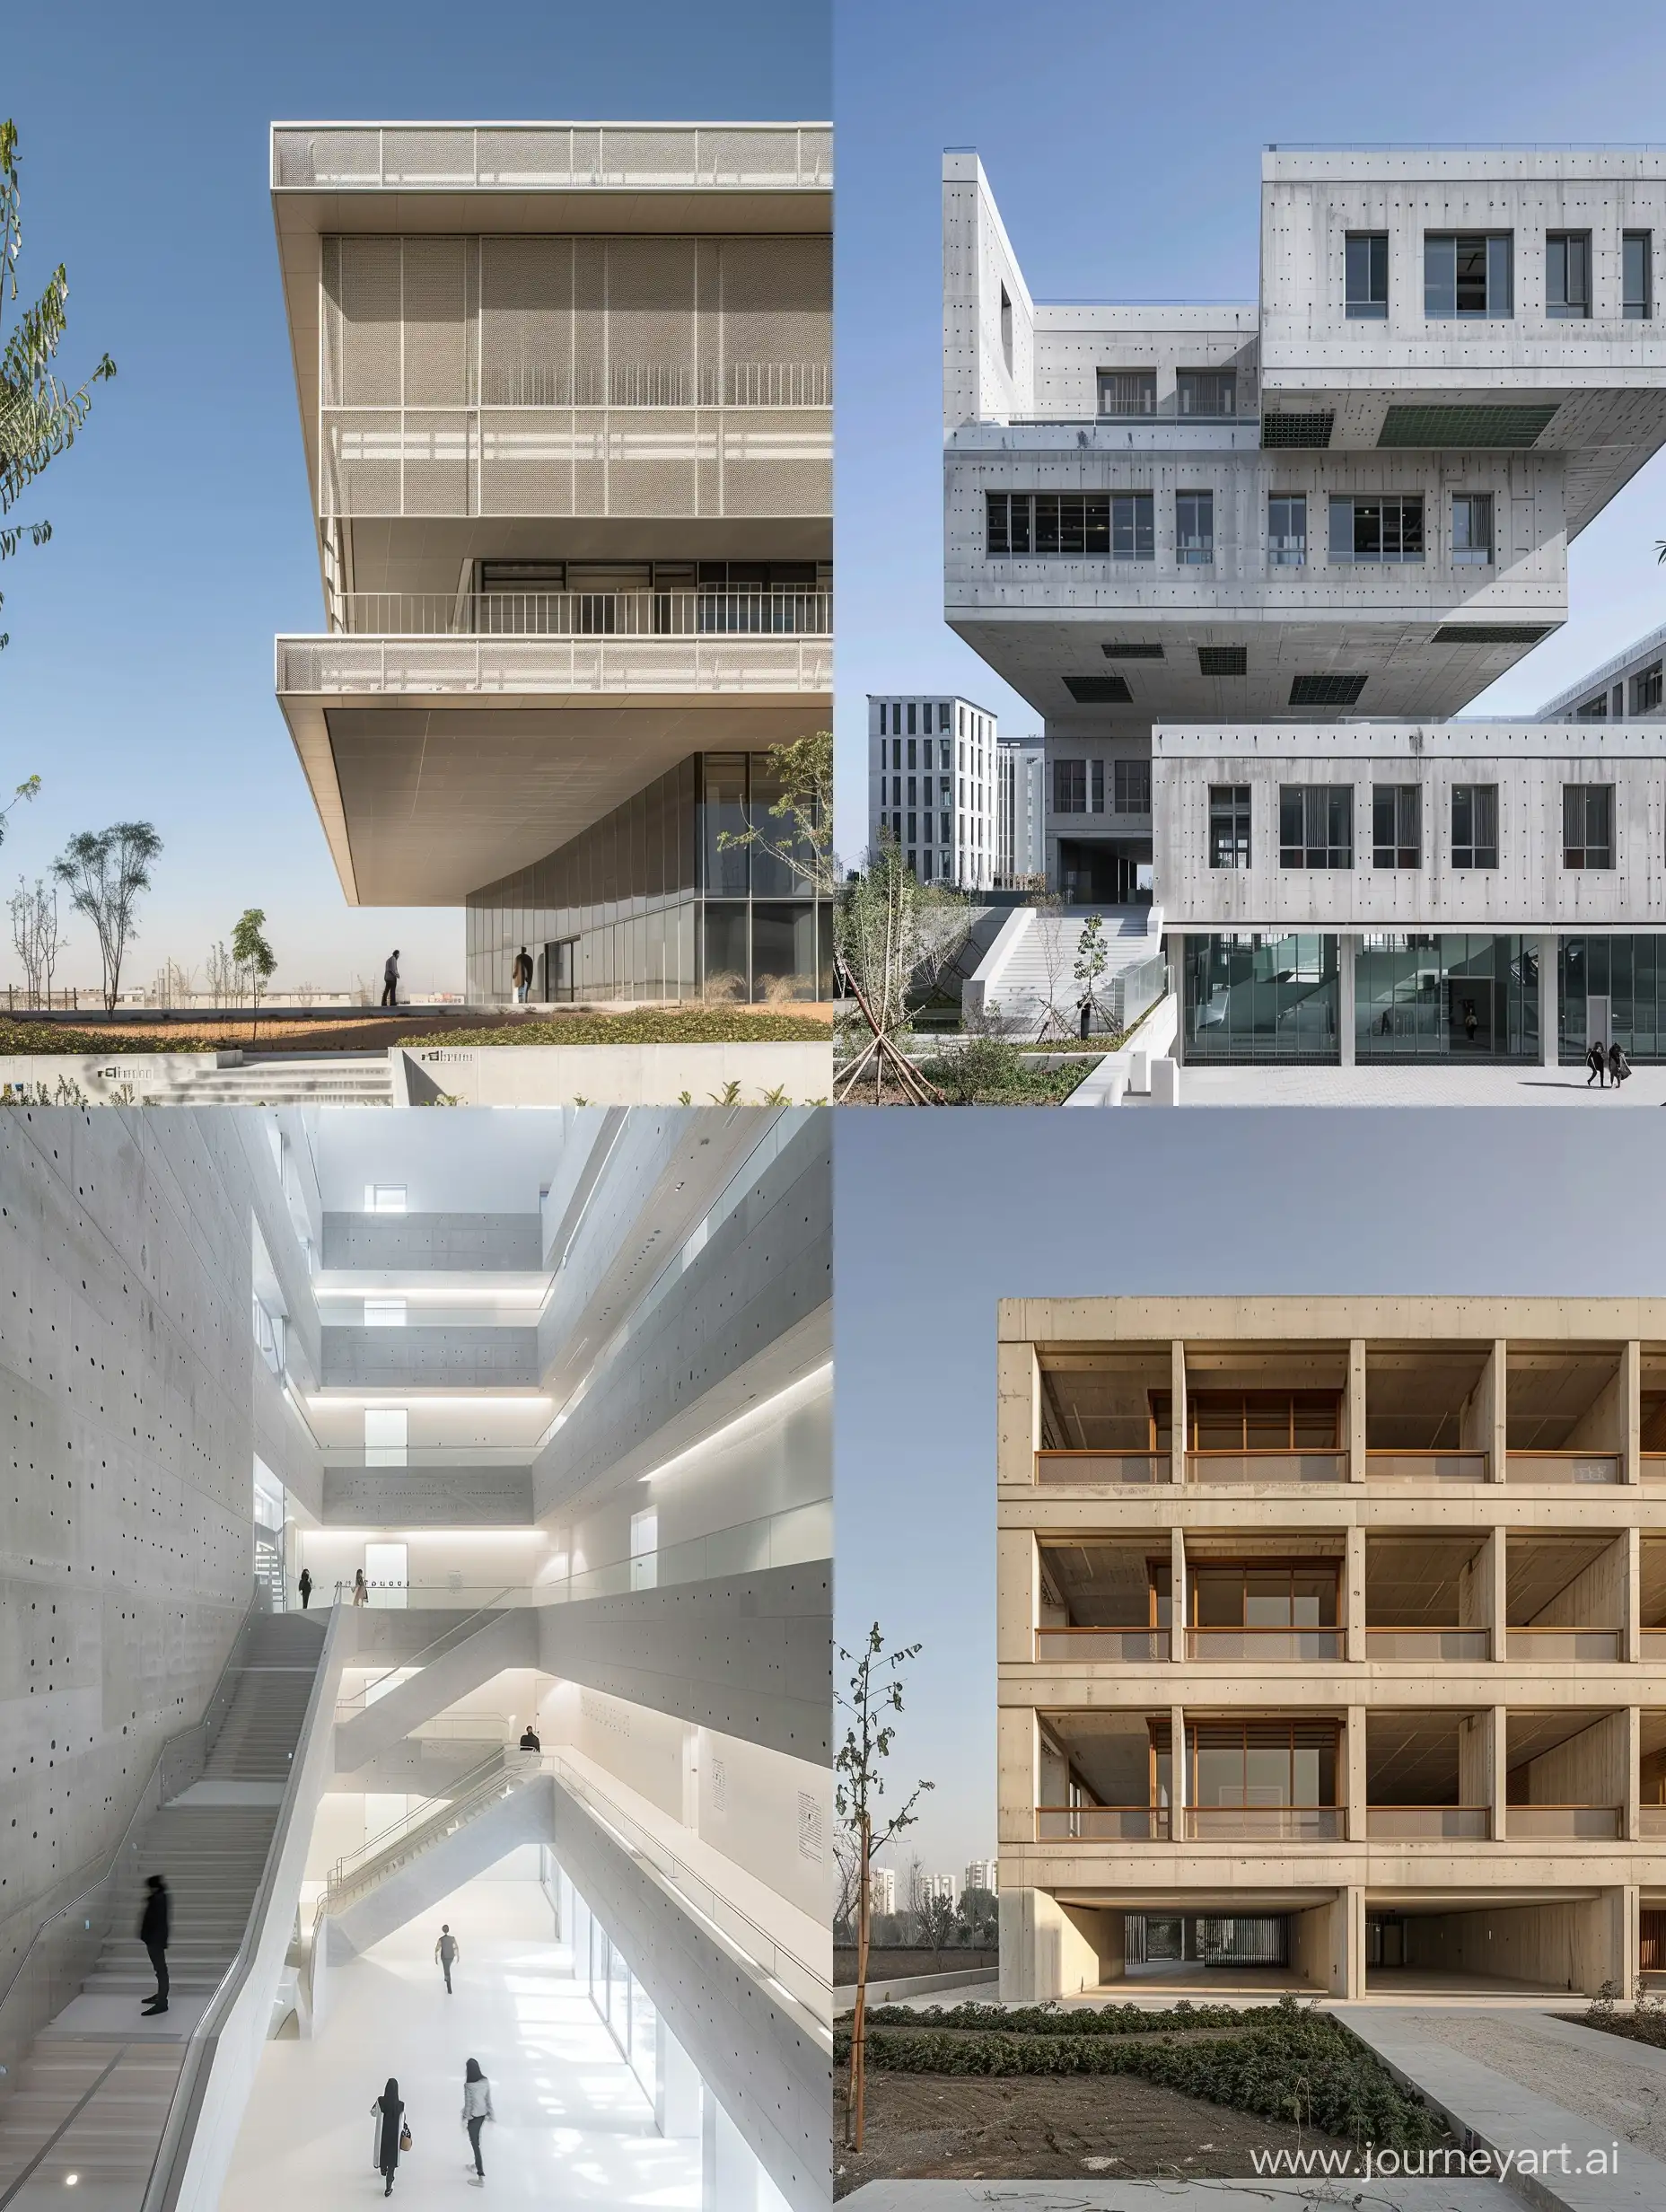 AwardWinning-Institutional-Building-Stunning-5Story-Architecture-Captured-by-Iwan-Baan